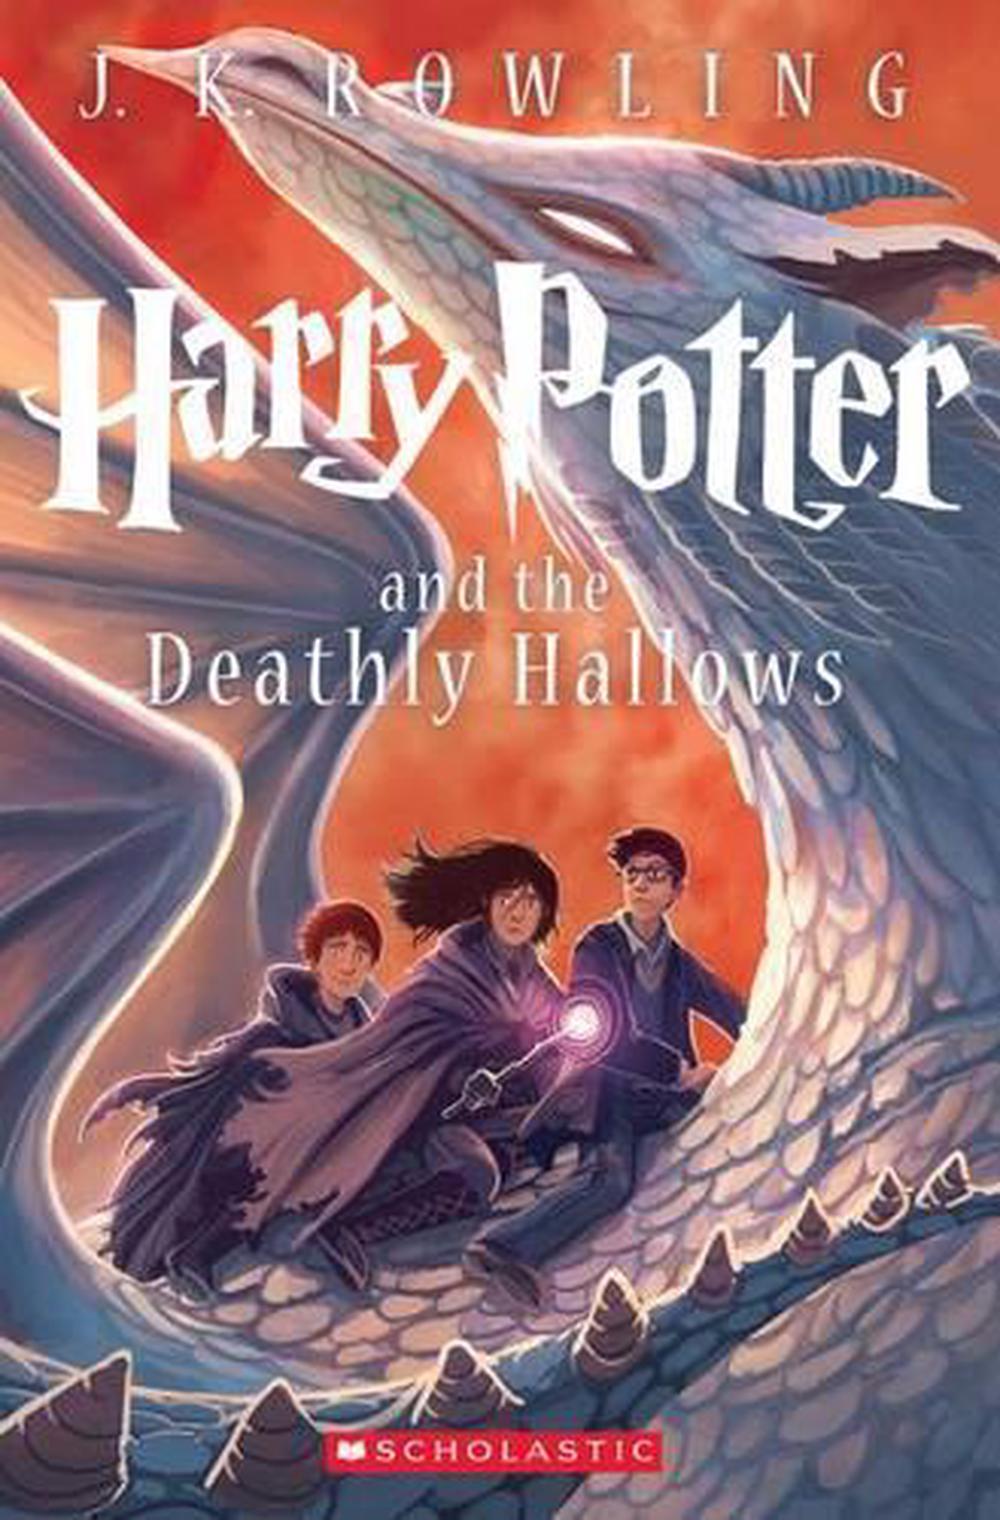 book report harry potter and the deathly hallows